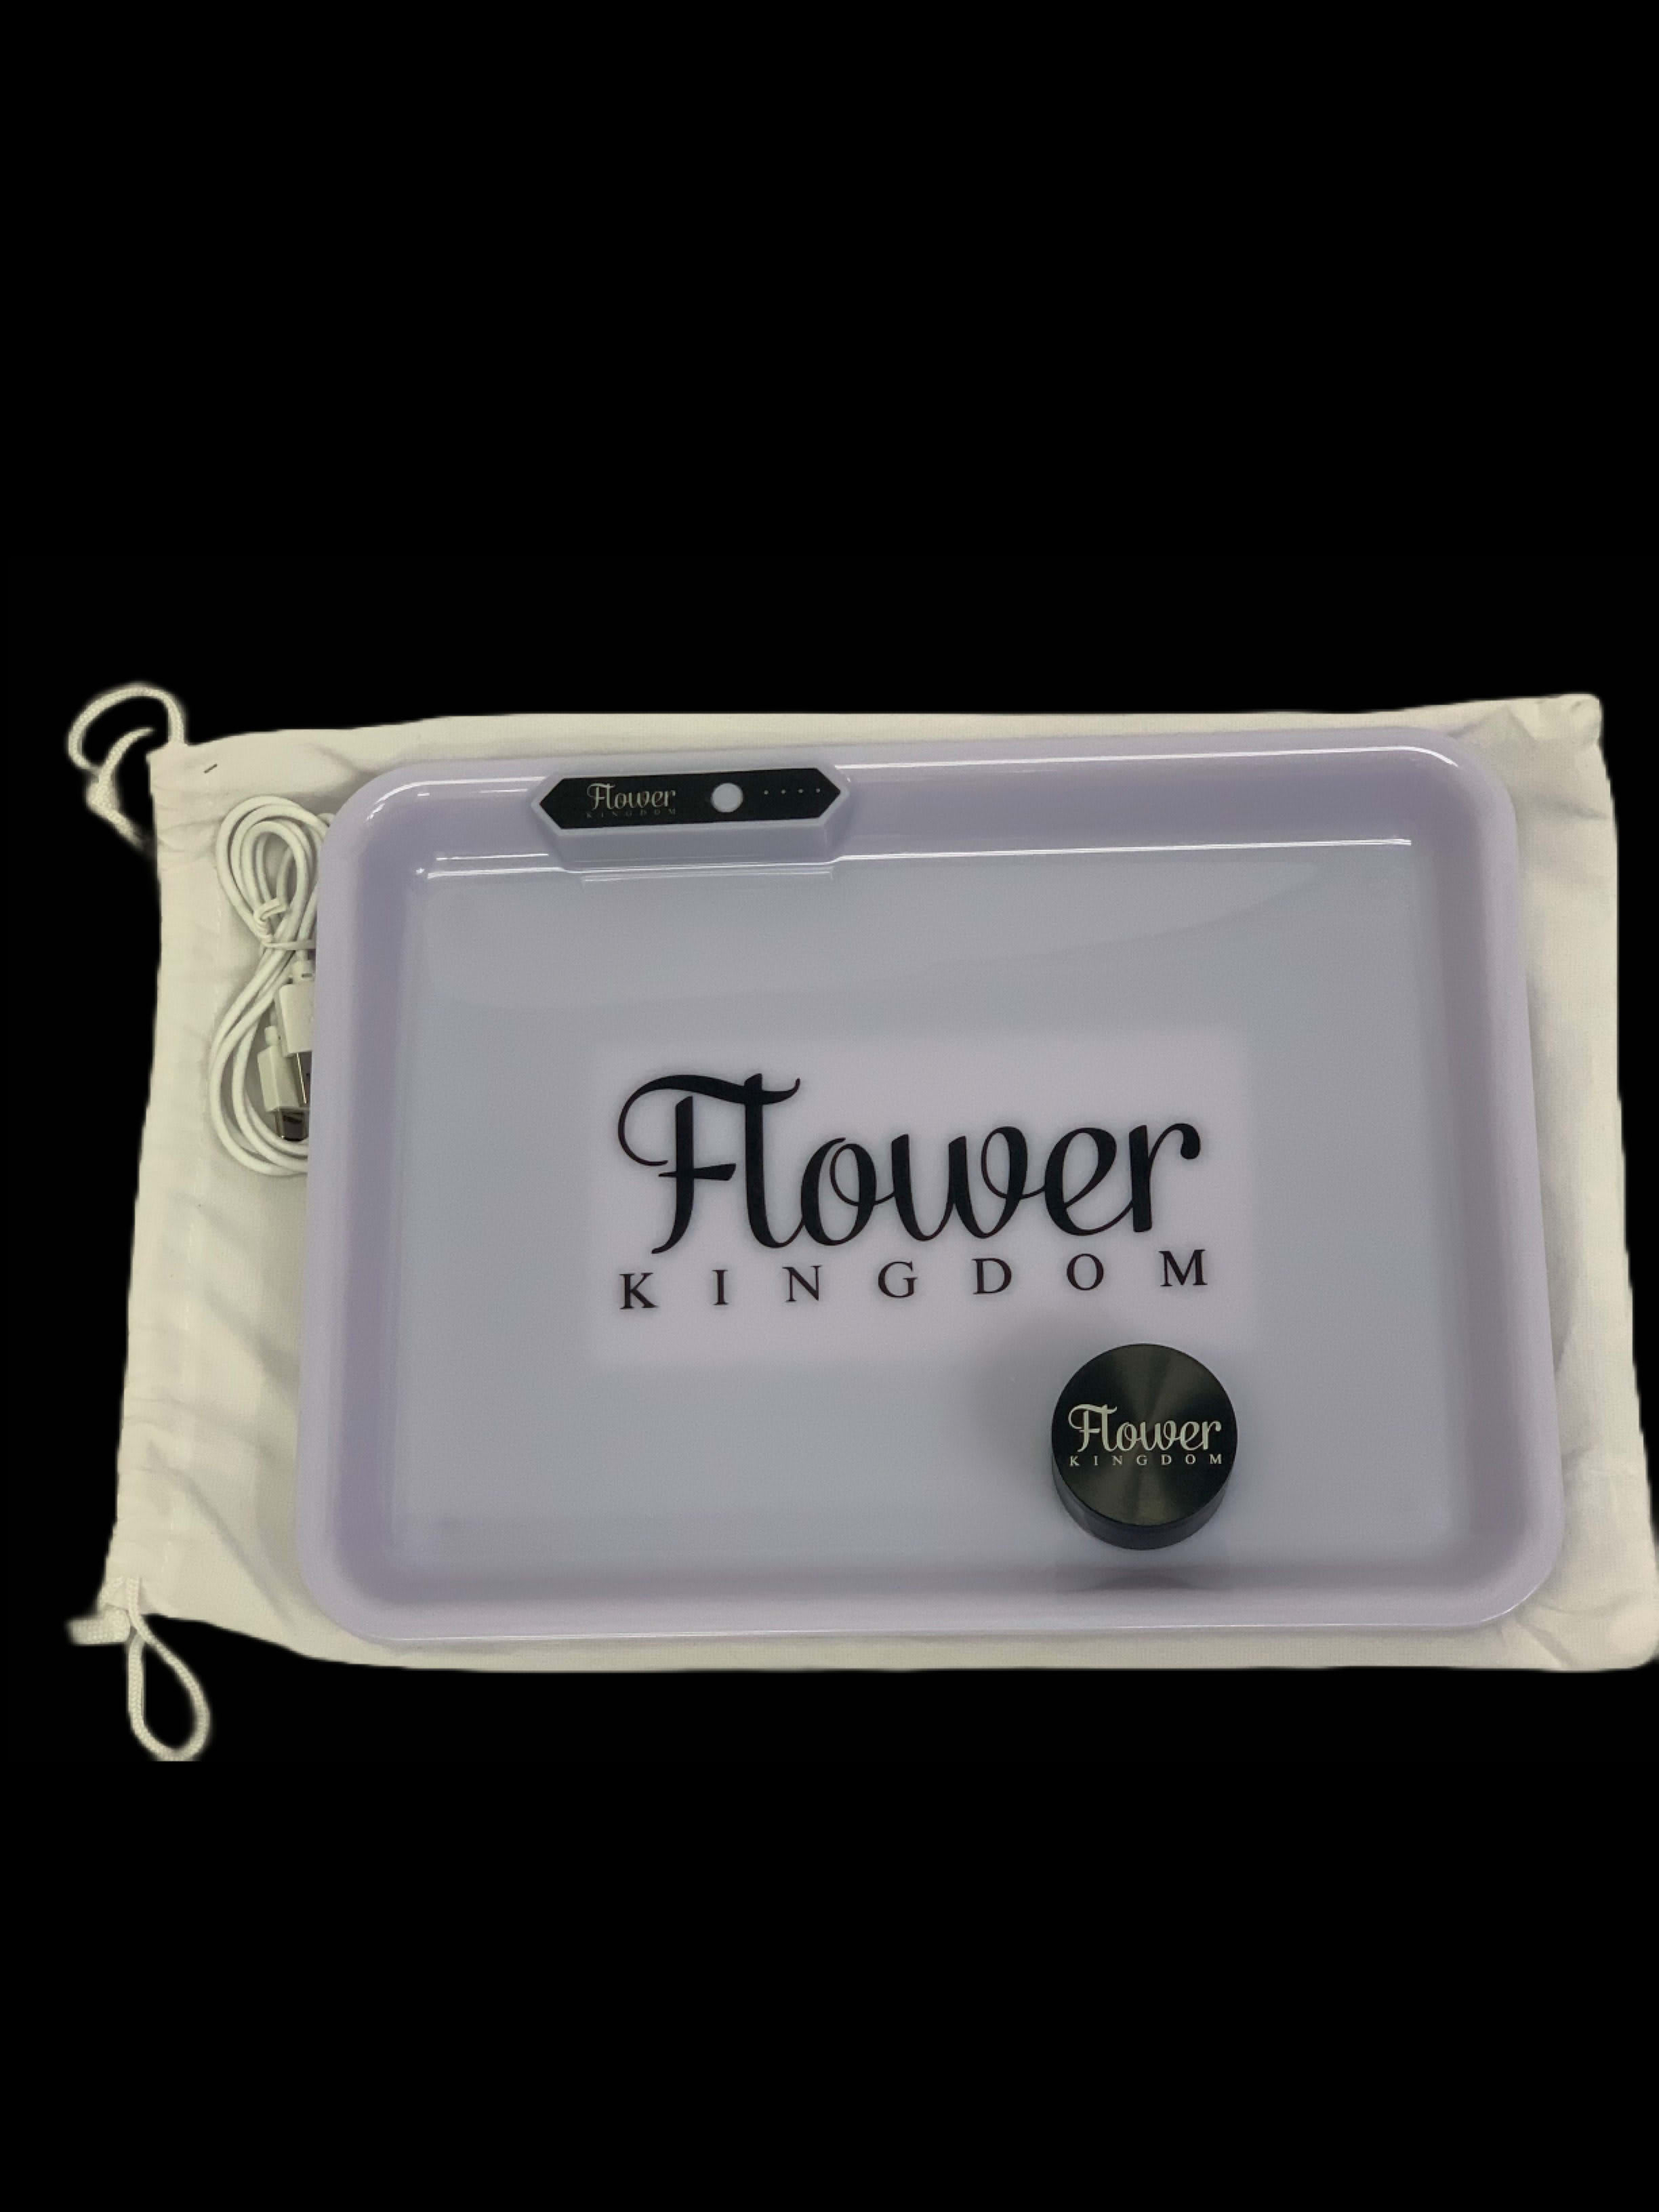 Checkered Groovy Flower Rolling Tray